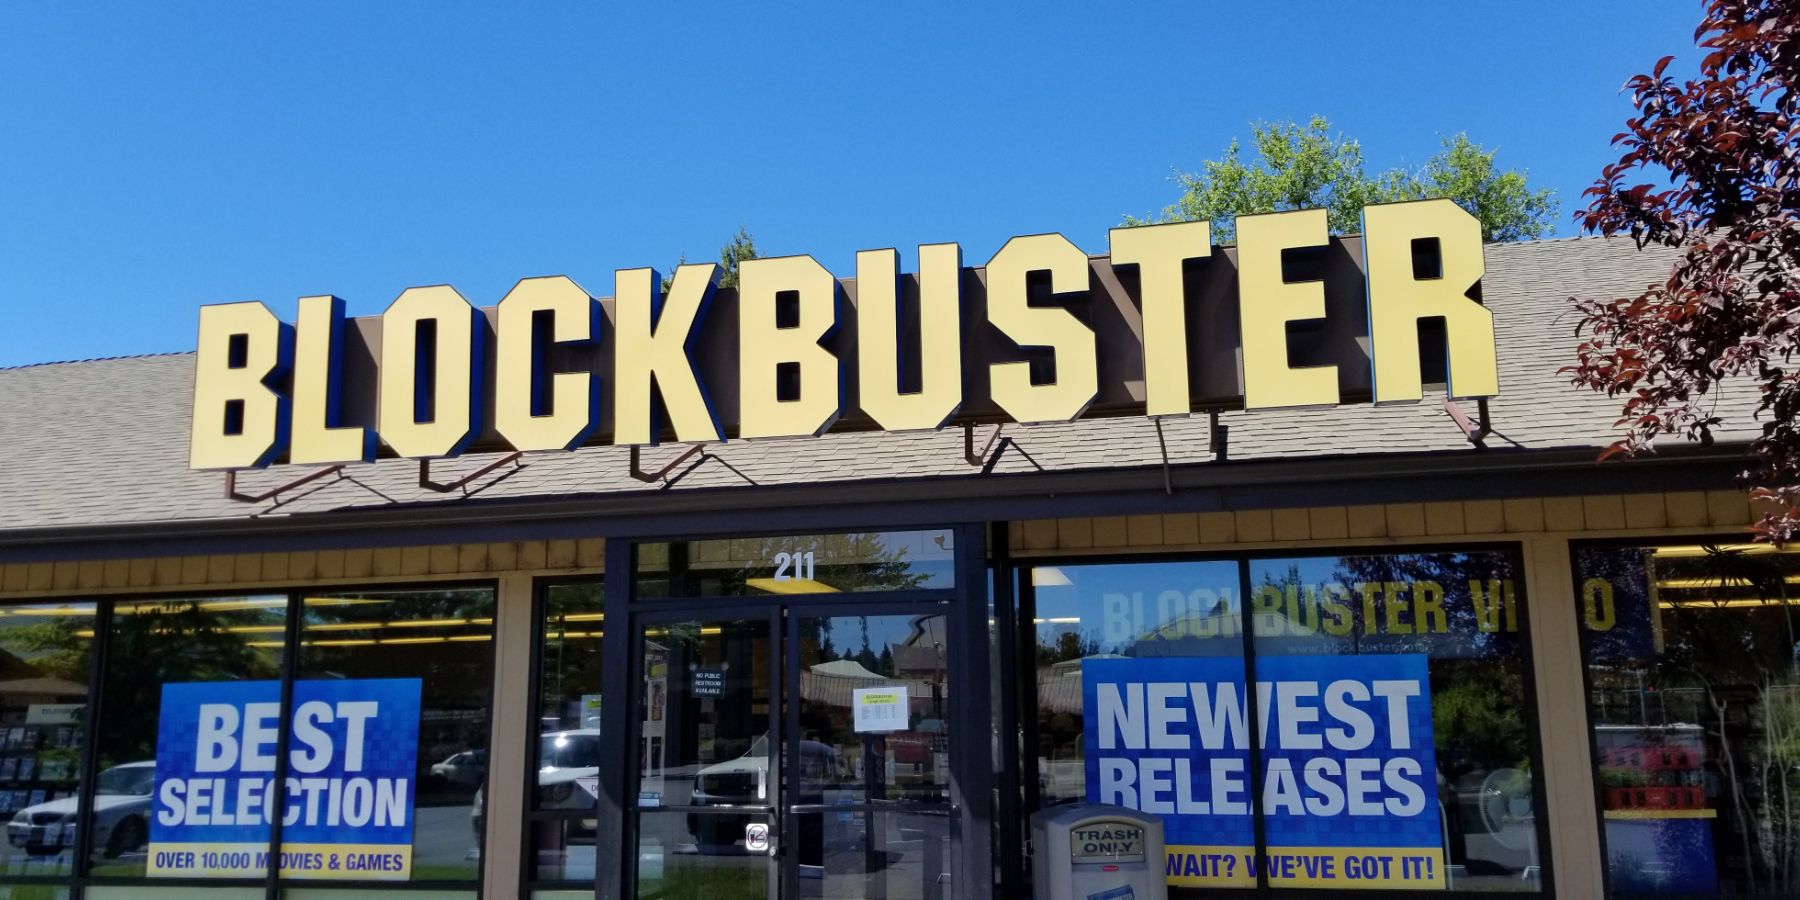 The Last Blockbuster Has Morbius Available to Rent